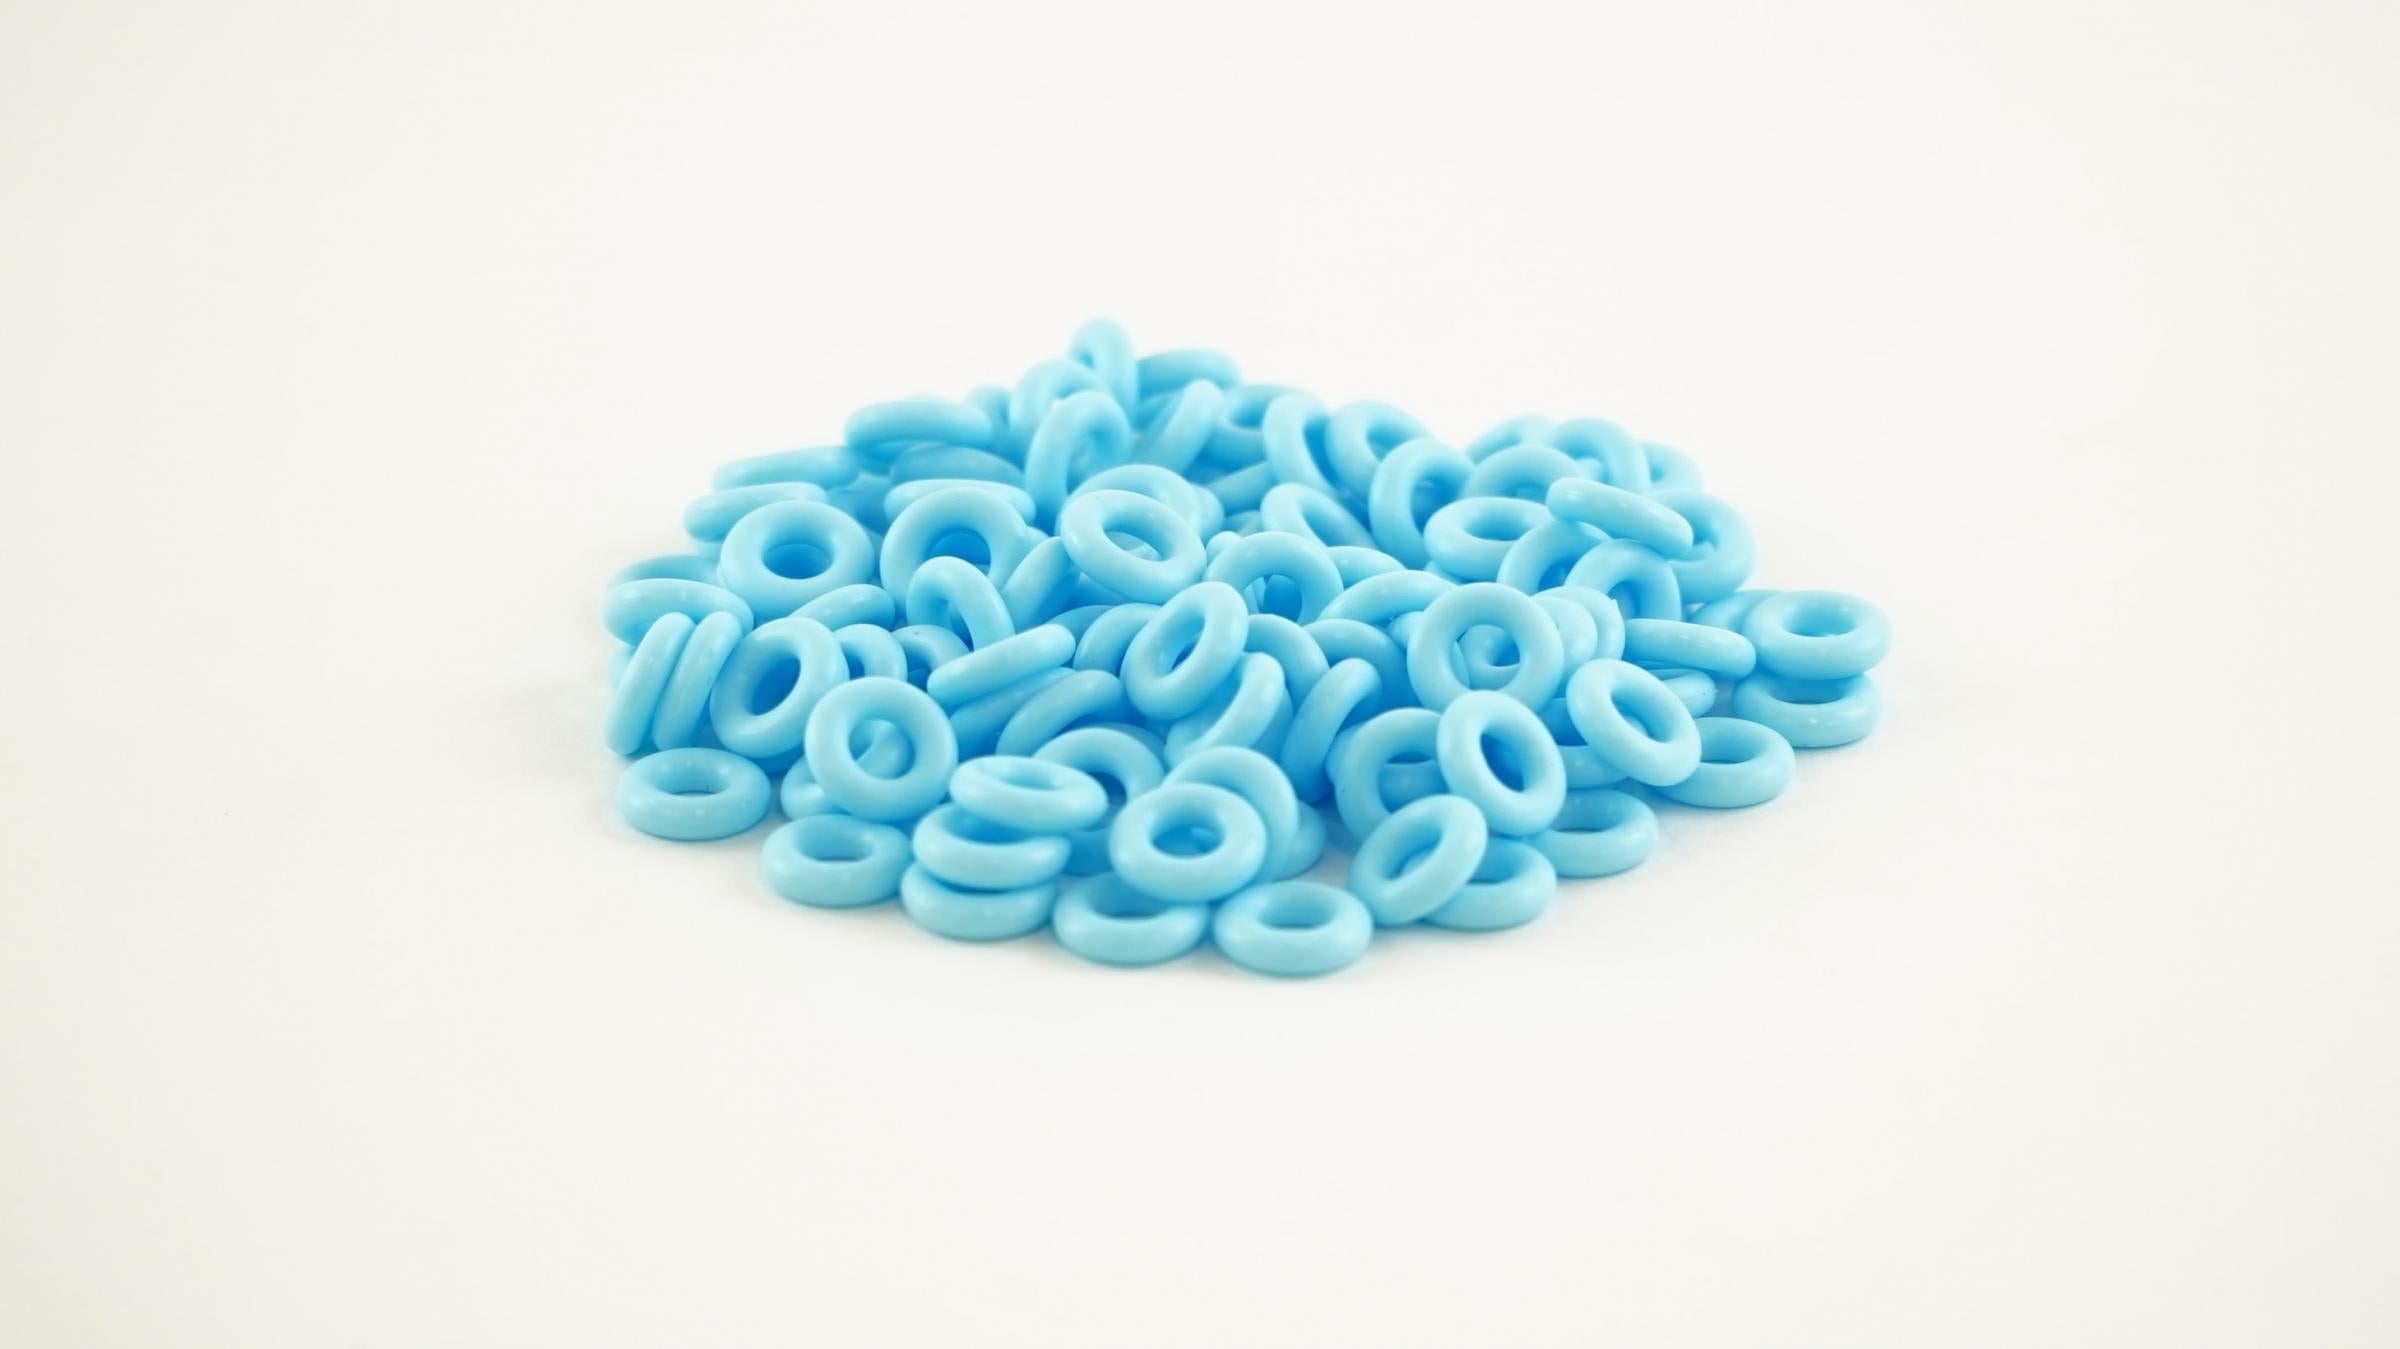 MK Pro Rings Silicone Switch Dampening O-rings 70A 3.0mm (120 Pack) MKF6QJRC4P |0|